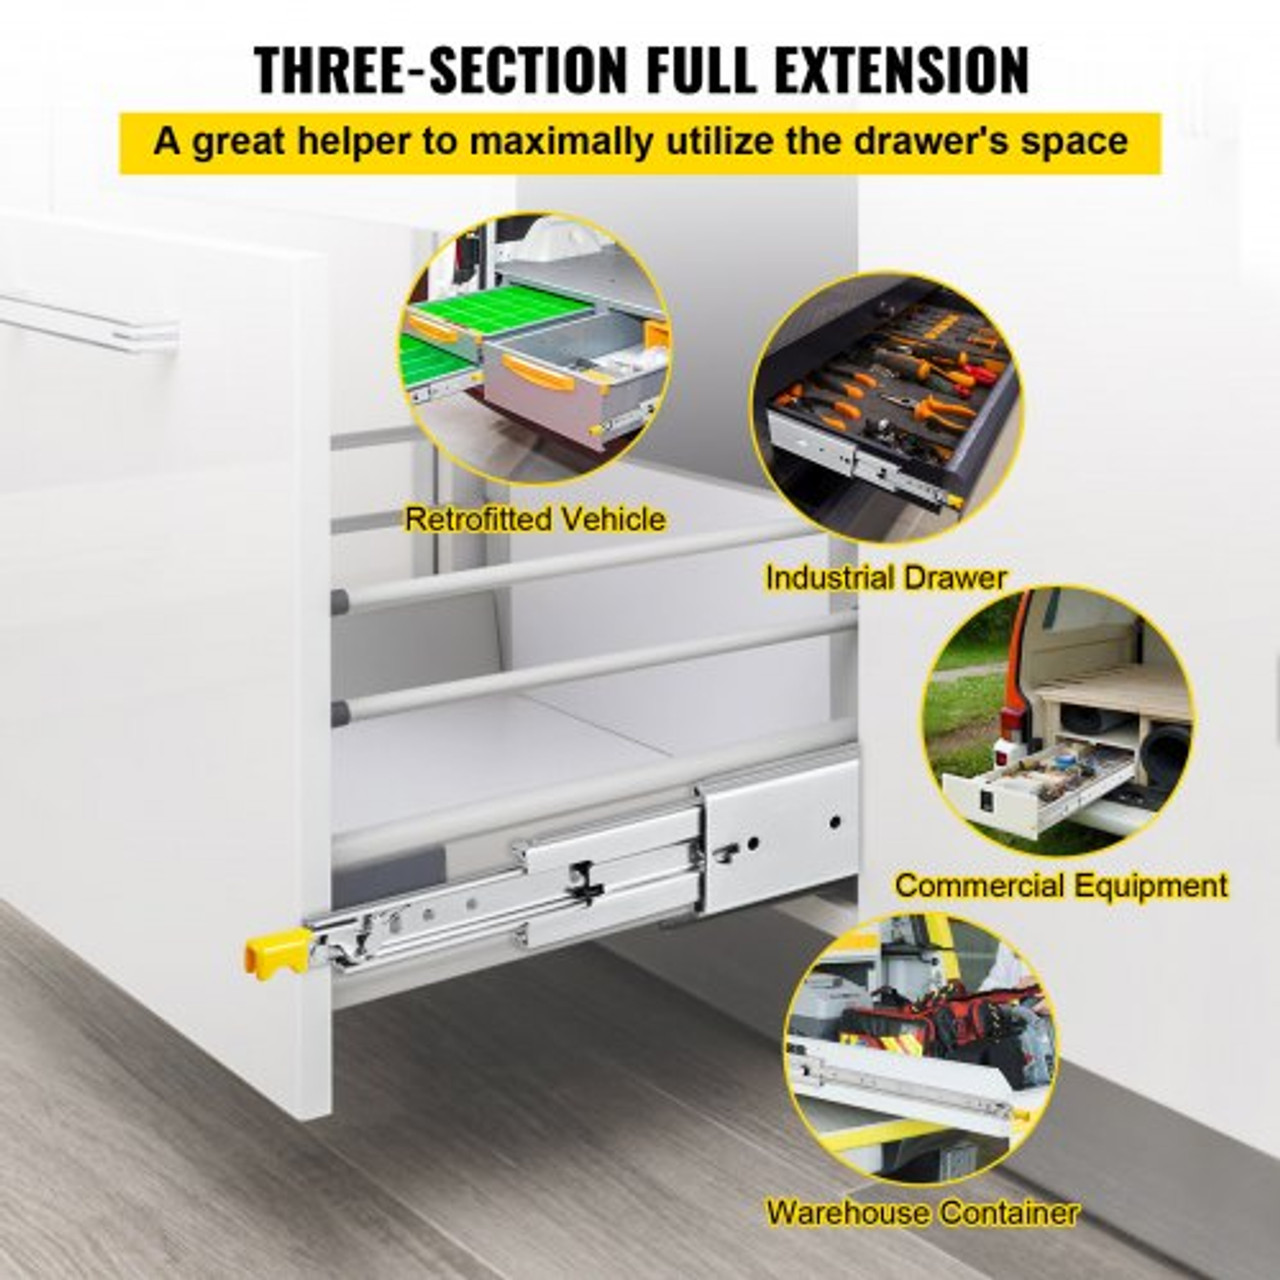 Drawer Slides with Lock, 1 Pair 28 inch, Heavy-Duty Industrial Steel up to 500 lbs Capacity, 3-Fold Full Extension, Ball Bearing Lock-in & Lock-Out, Side Mount